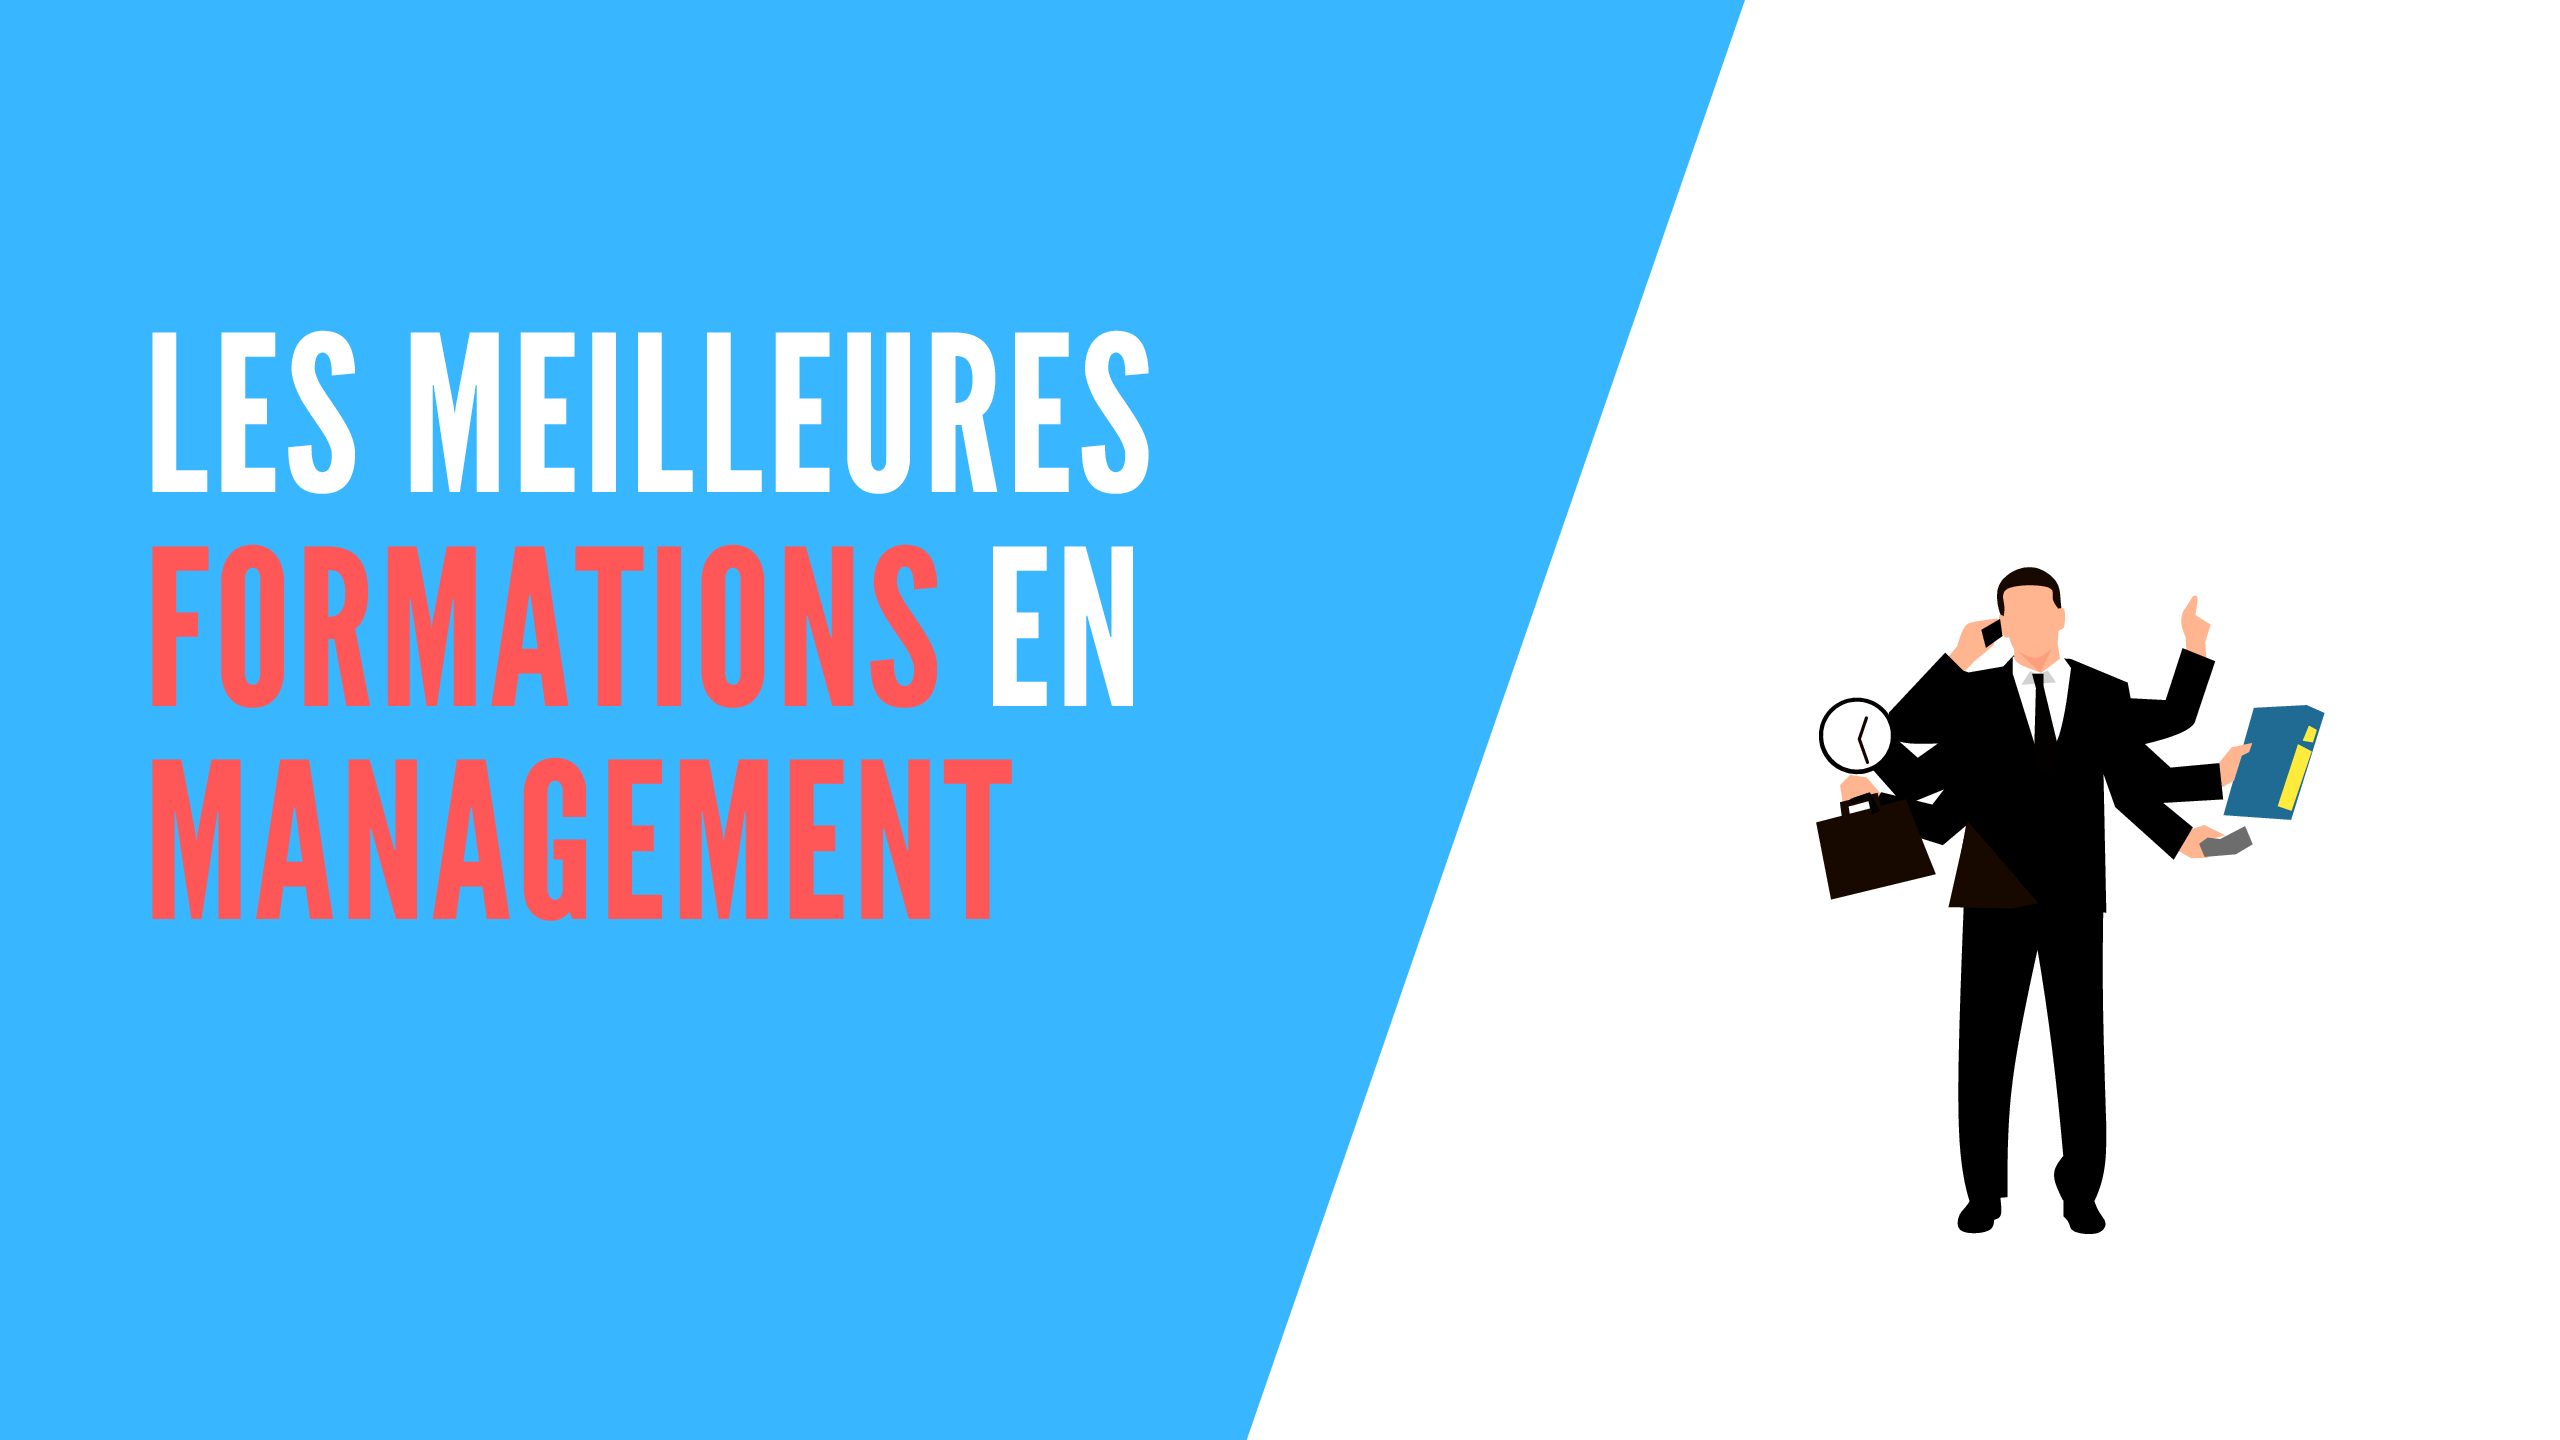 You are currently viewing Les meilleures formations en management